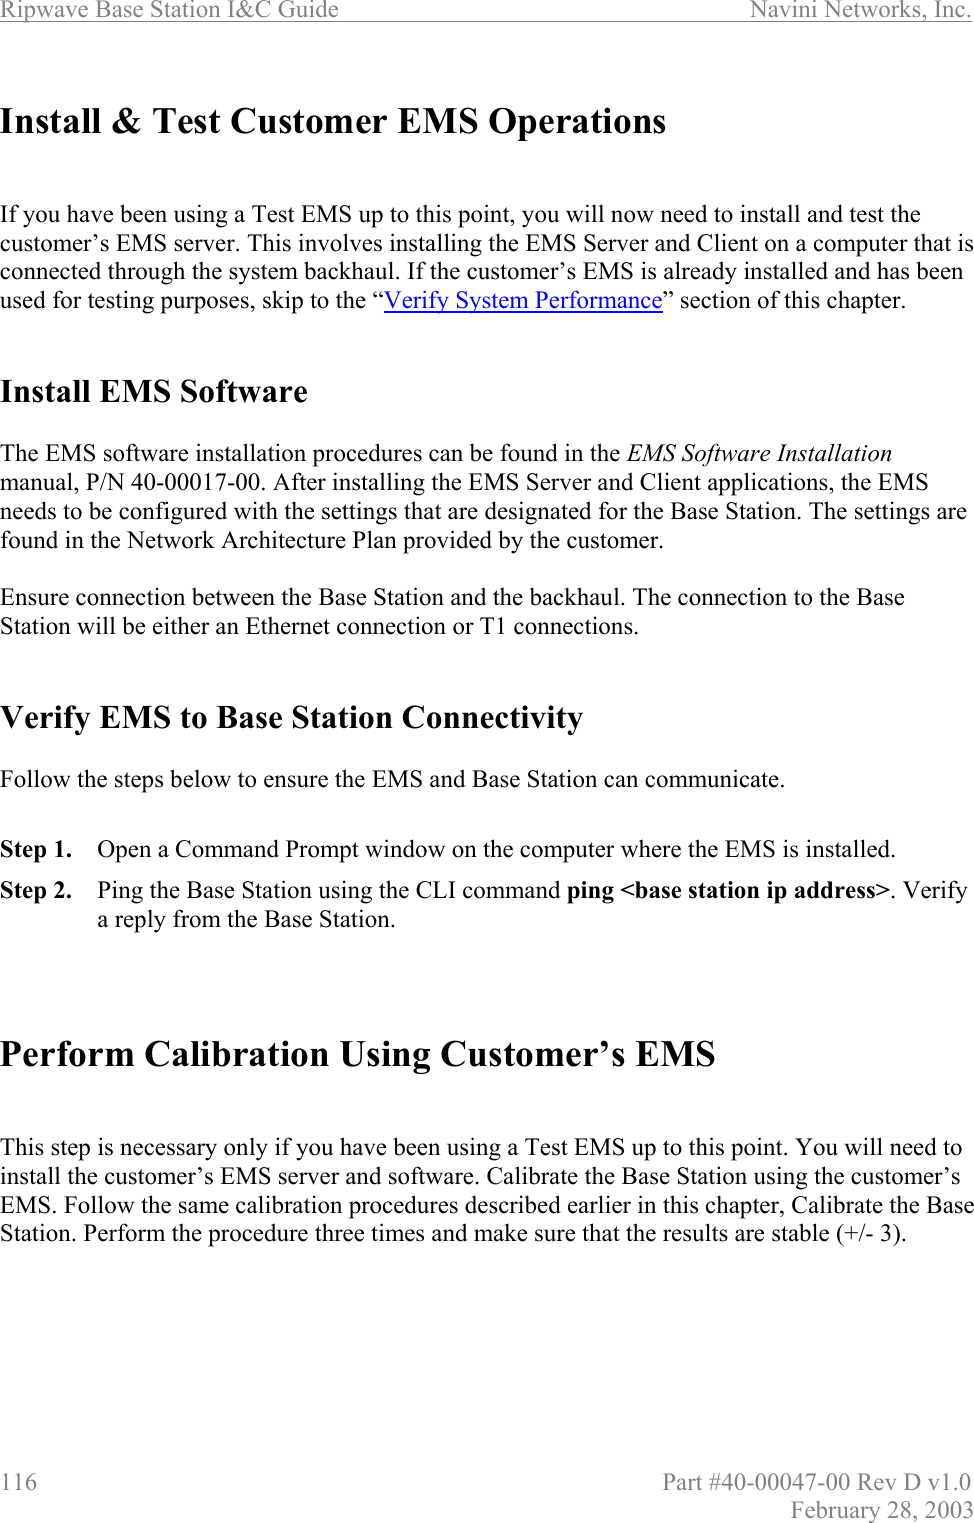 Ripwave Base Station I&amp;C Guide                      Navini Networks, Inc. 116                          Part #40-00047-00 Rev D v1.0 February 28, 2003  Install &amp; Test Customer EMS Operations   If you have been using a Test EMS up to this point, you will now need to install and test the customer’s EMS server. This involves installing the EMS Server and Client on a computer that is connected through the system backhaul. If the customer’s EMS is already installed and has been used for testing purposes, skip to the “Verify System Performance” section of this chapter.    Install EMS Software  The EMS software installation procedures can be found in the EMS Software Installation manual, P/N 40-00017-00. After installing the EMS Server and Client applications, the EMS needs to be configured with the settings that are designated for the Base Station. The settings are found in the Network Architecture Plan provided by the customer.   Ensure connection between the Base Station and the backhaul. The connection to the Base Station will be either an Ethernet connection or T1 connections.     Verify EMS to Base Station Connectivity  Follow the steps below to ensure the EMS and Base Station can communicate.  Step 1.  Open a Command Prompt window on the computer where the EMS is installed.  Step 2.  Ping the Base Station using the CLI command ping &lt;base station ip address&gt;. Verify a reply from the Base Station.    Perform Calibration Using Customer’s EMS    This step is necessary only if you have been using a Test EMS up to this point. You will need to install the customer’s EMS server and software. Calibrate the Base Station using the customer’s EMS. Follow the same calibration procedures described earlier in this chapter, Calibrate the Base Station. Perform the procedure three times and make sure that the results are stable (+/- 3).   